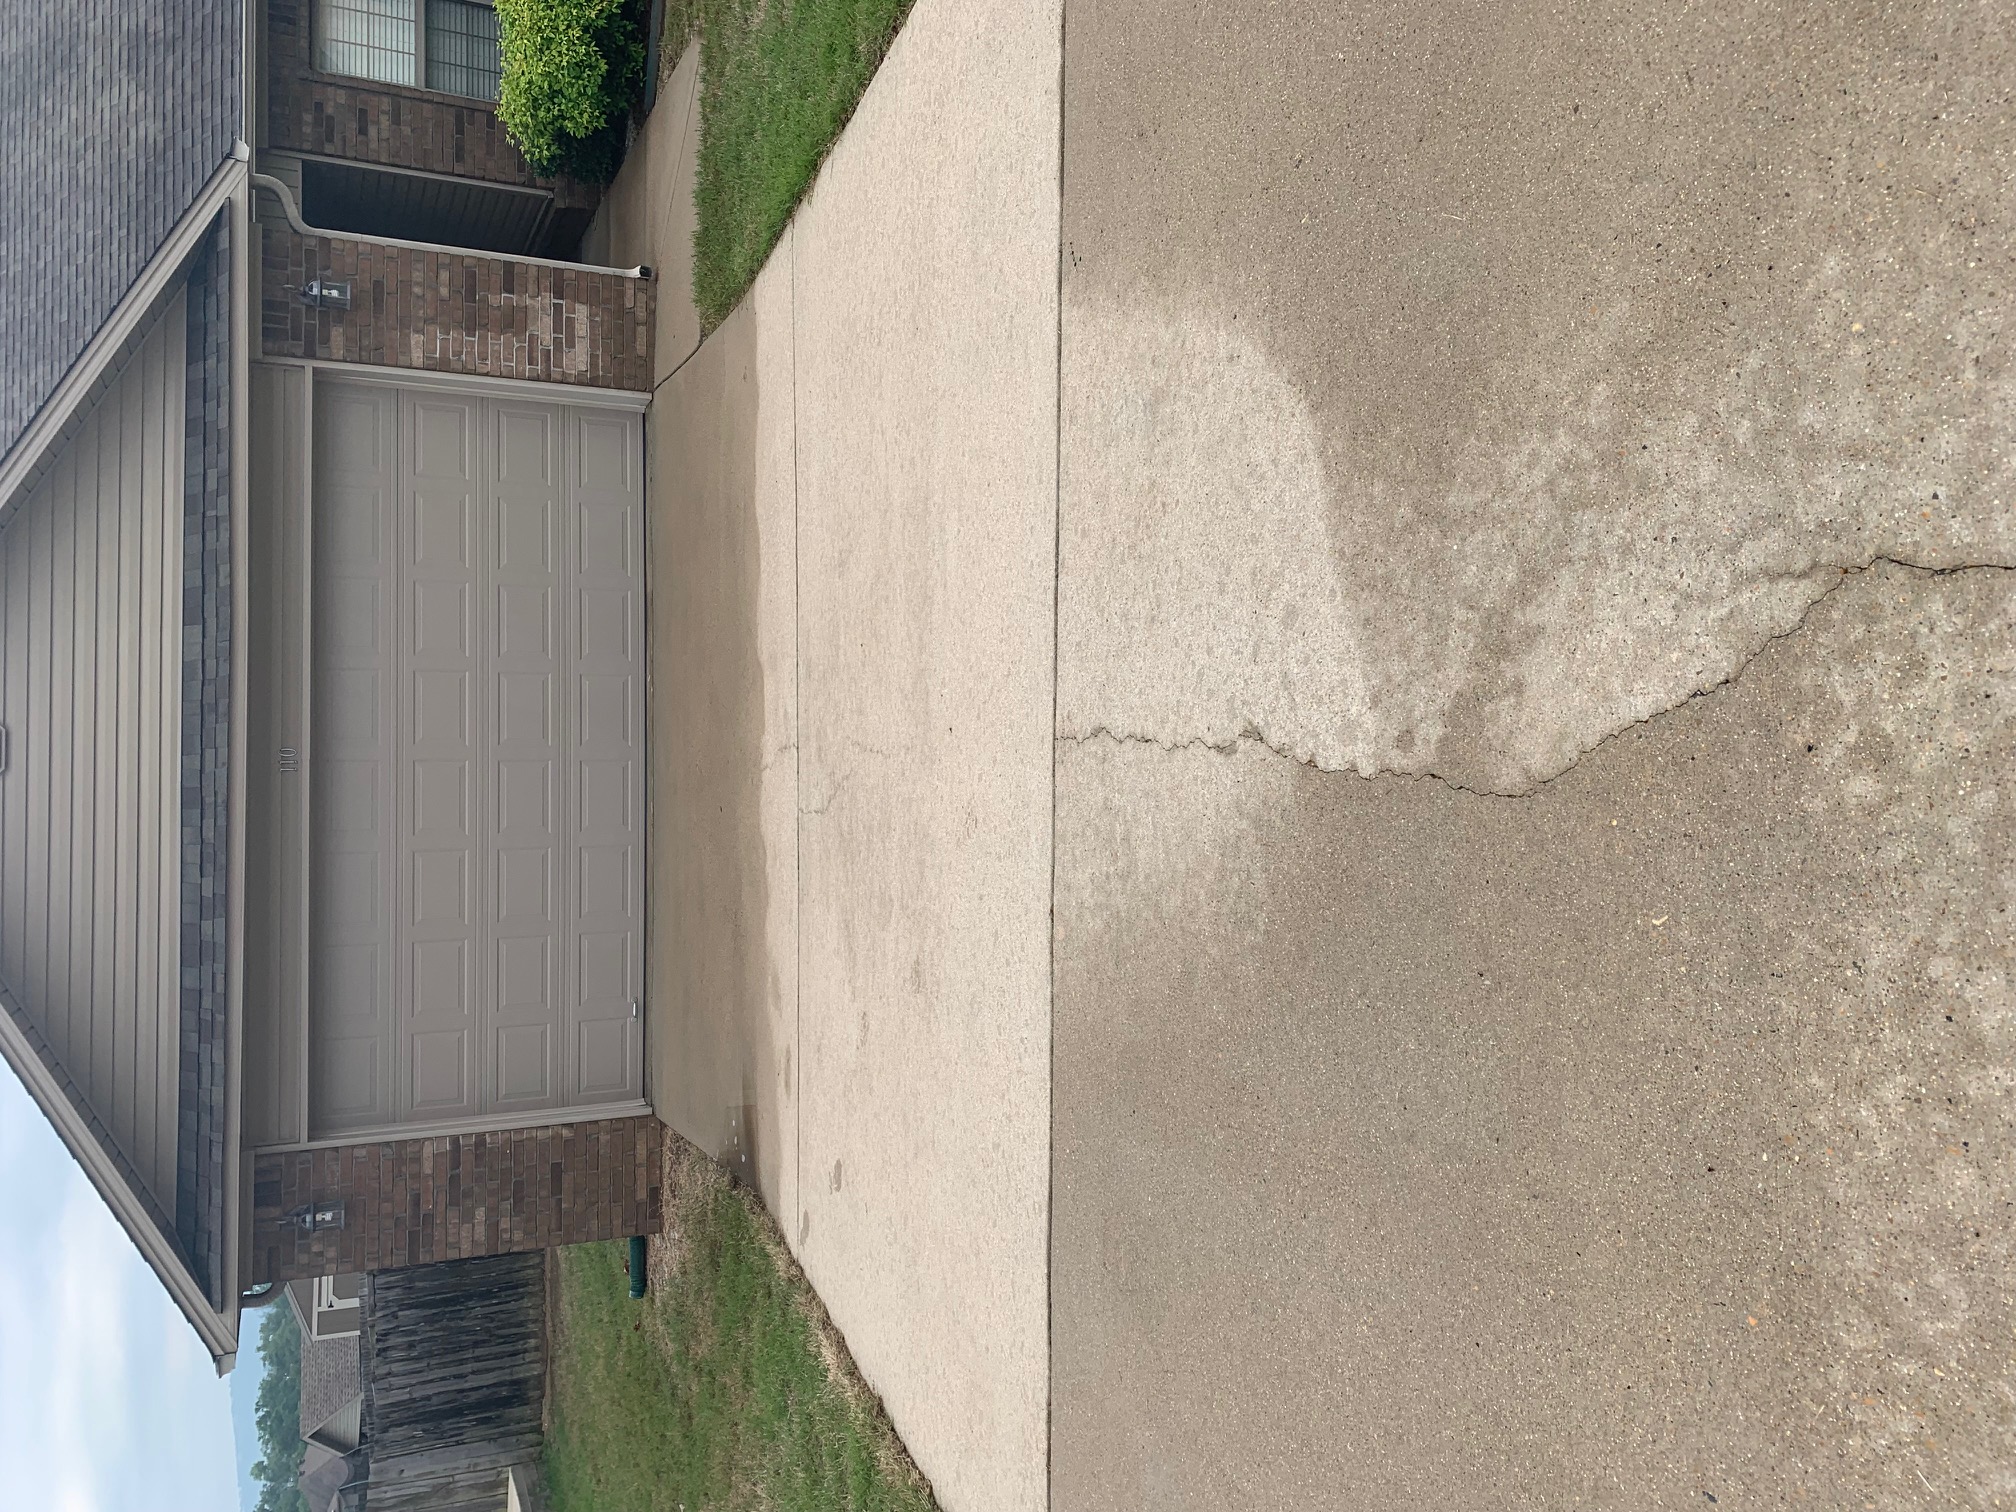 Professional Driveway Cleaning Services in Hot Springs, AR by Noble Exterior Washing